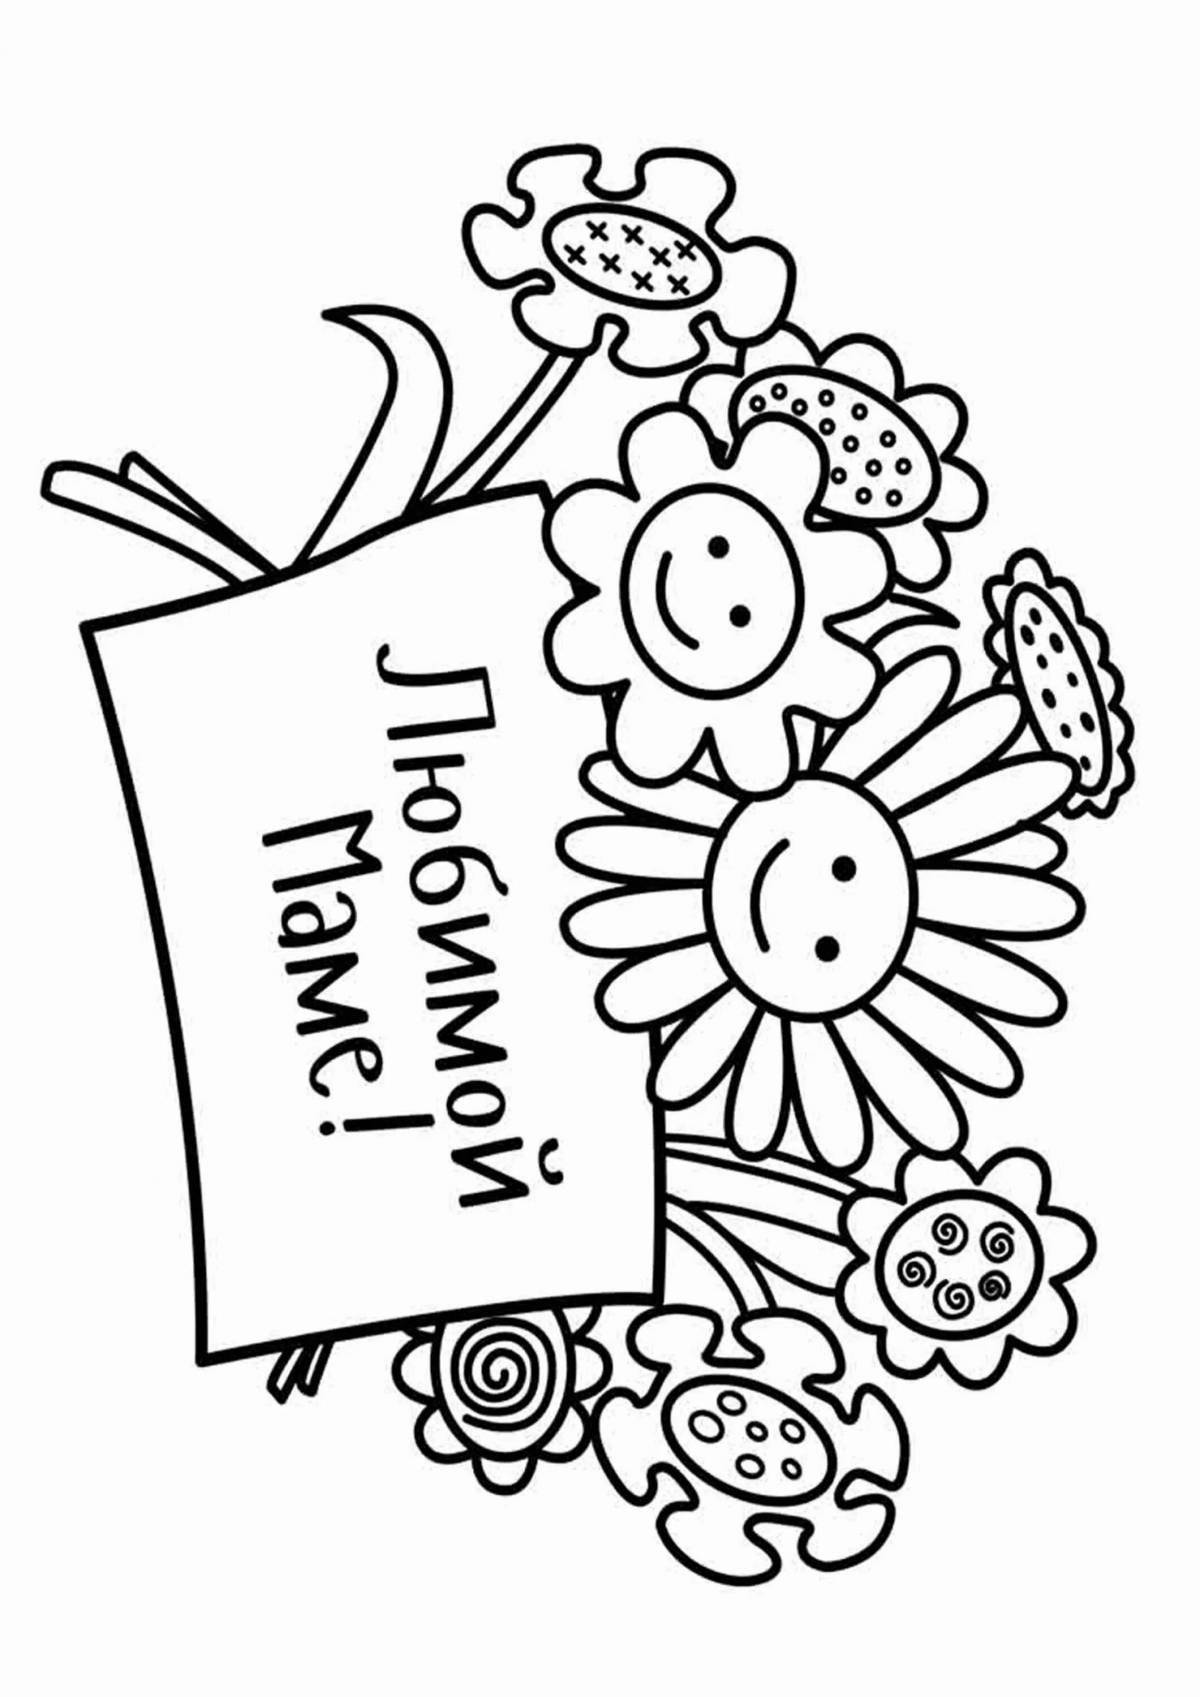 Happy birthday teacher coloring page